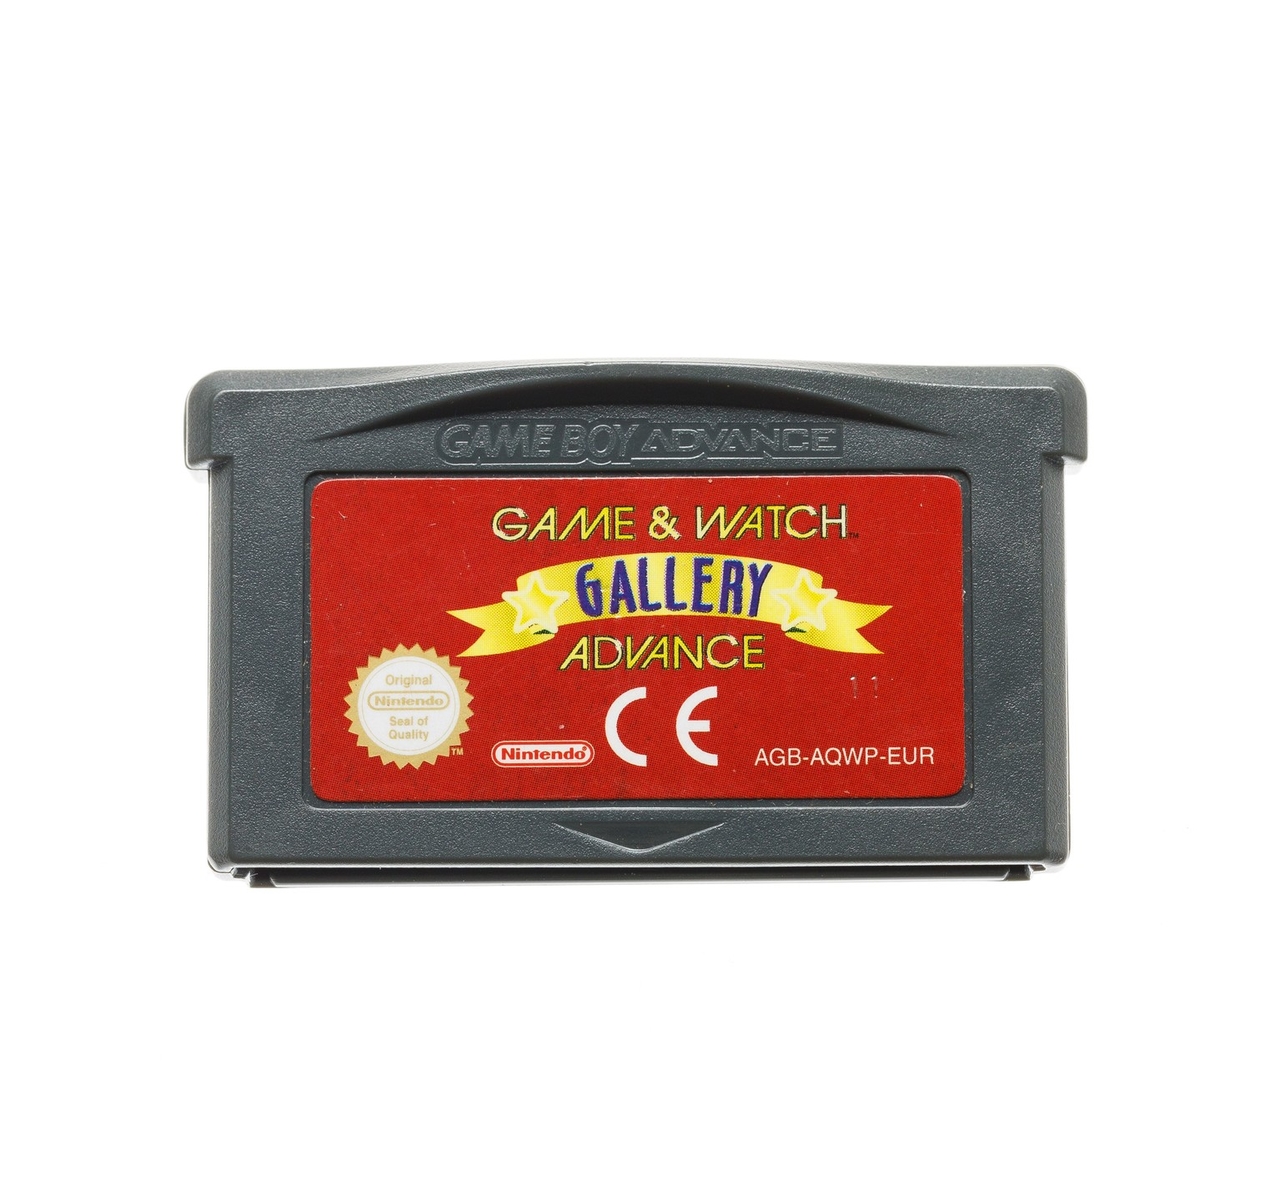 Game & Watch Gallery Advance - Gameboy Advance Games